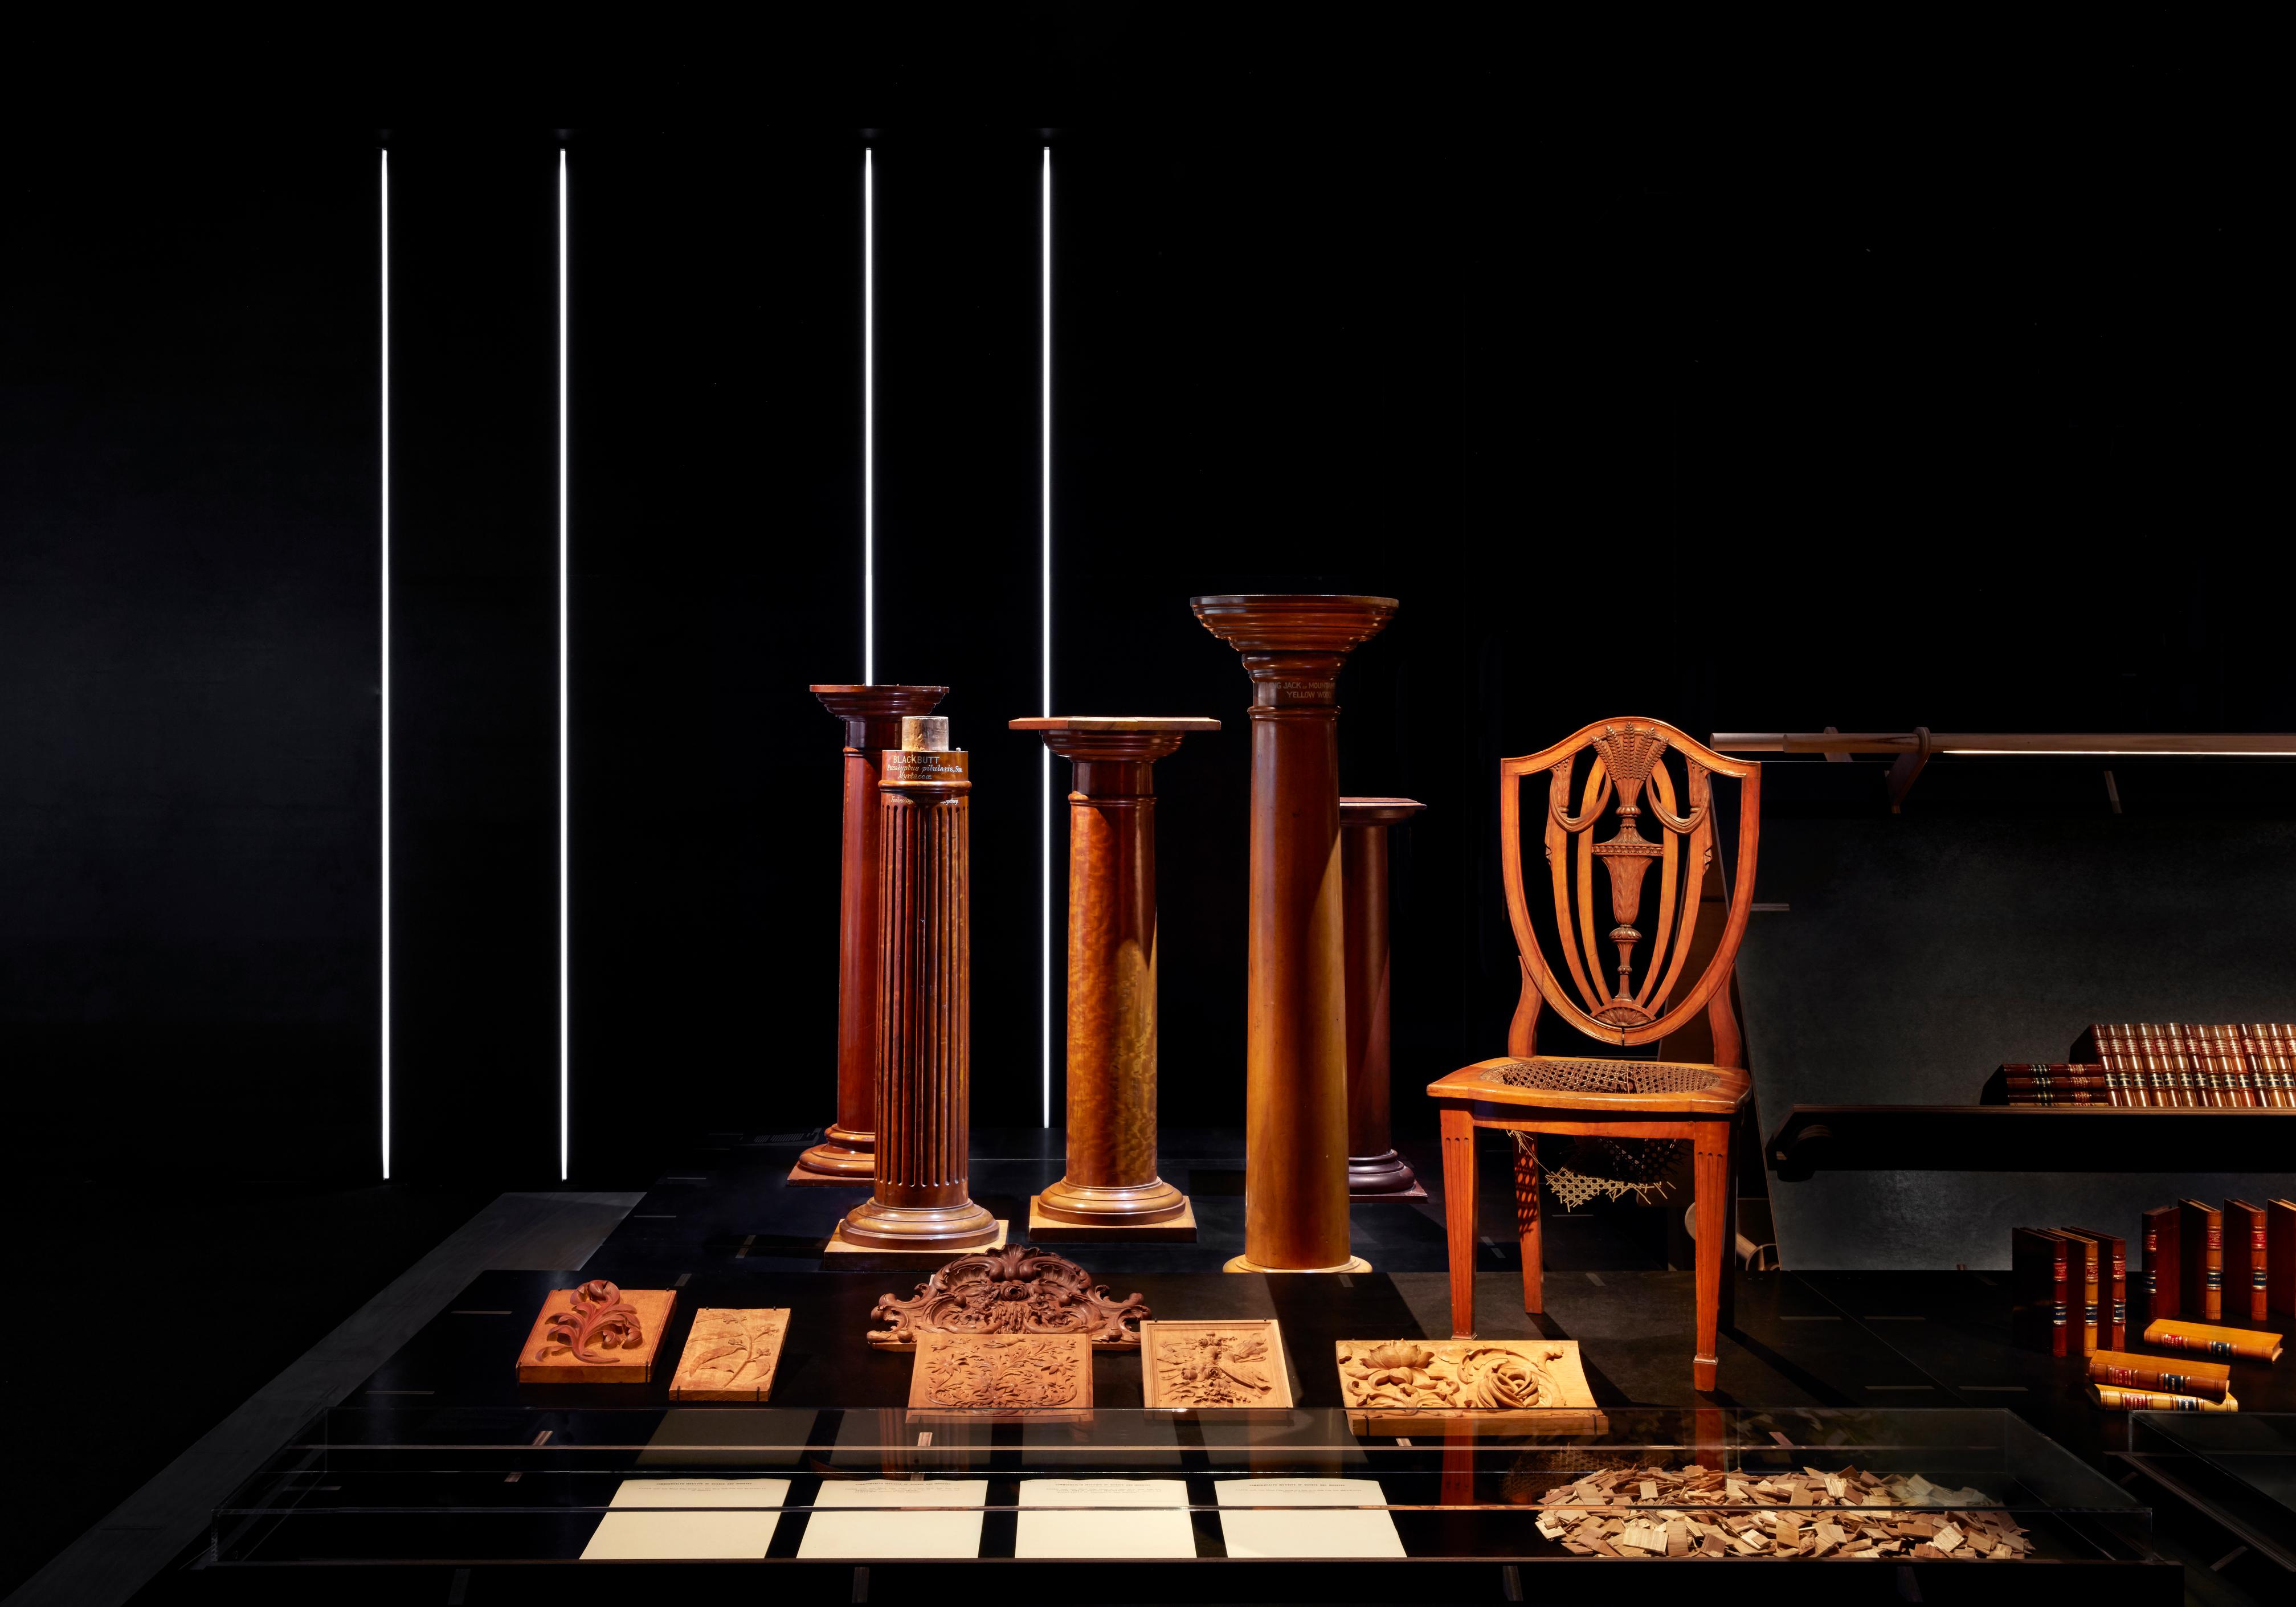 A collection of timbre furniture including a chair, pillars, and engravings.